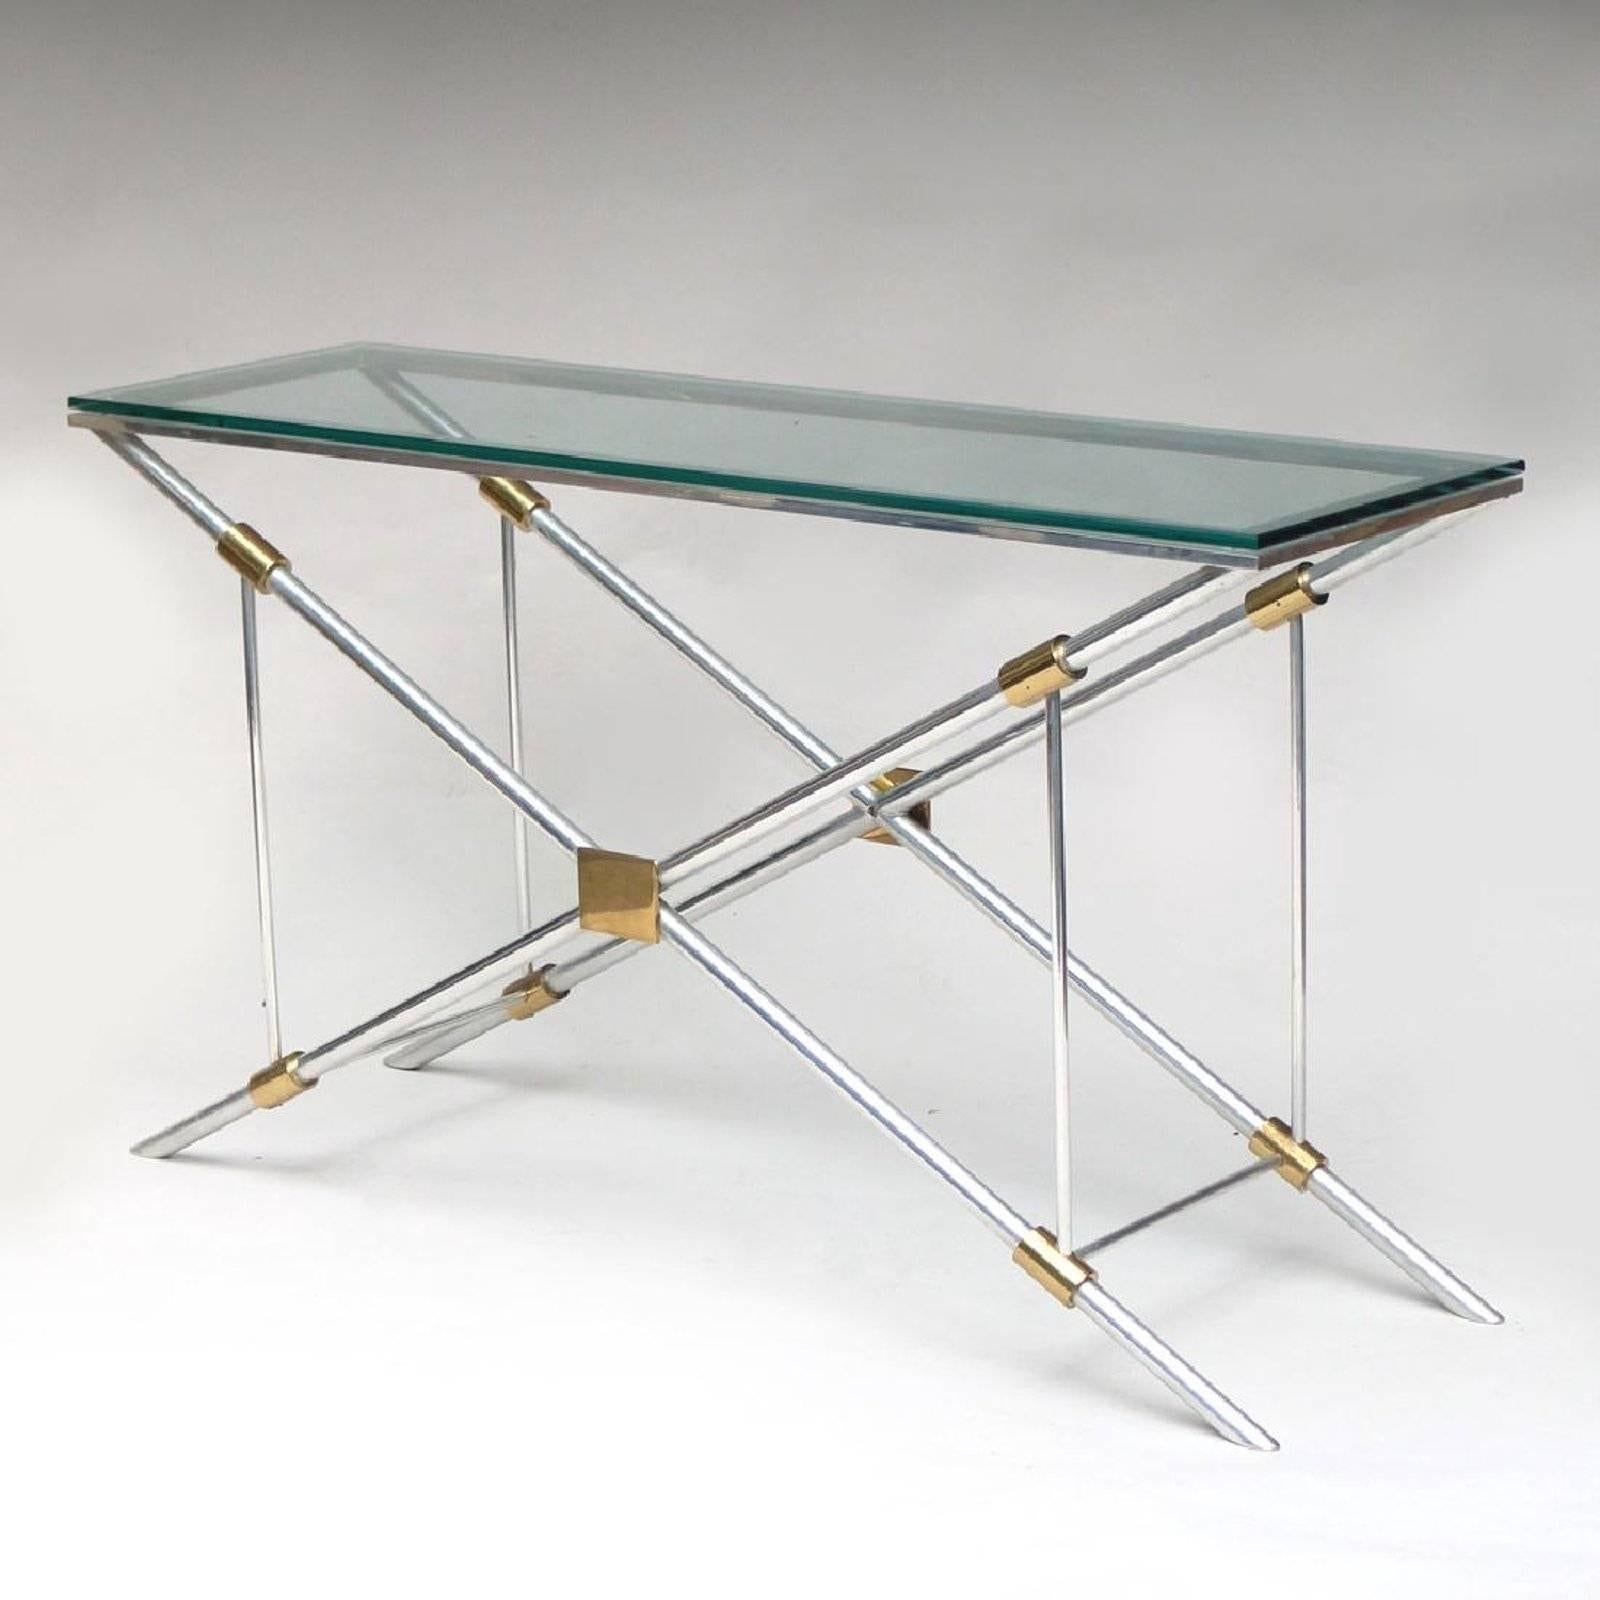 A console table by John Vesey (1924-1992) for John Vesey Inc. A rare model from the designer who reinvented classics for modern living.
Constructed in polished aluminium and brass accents, with glass top.